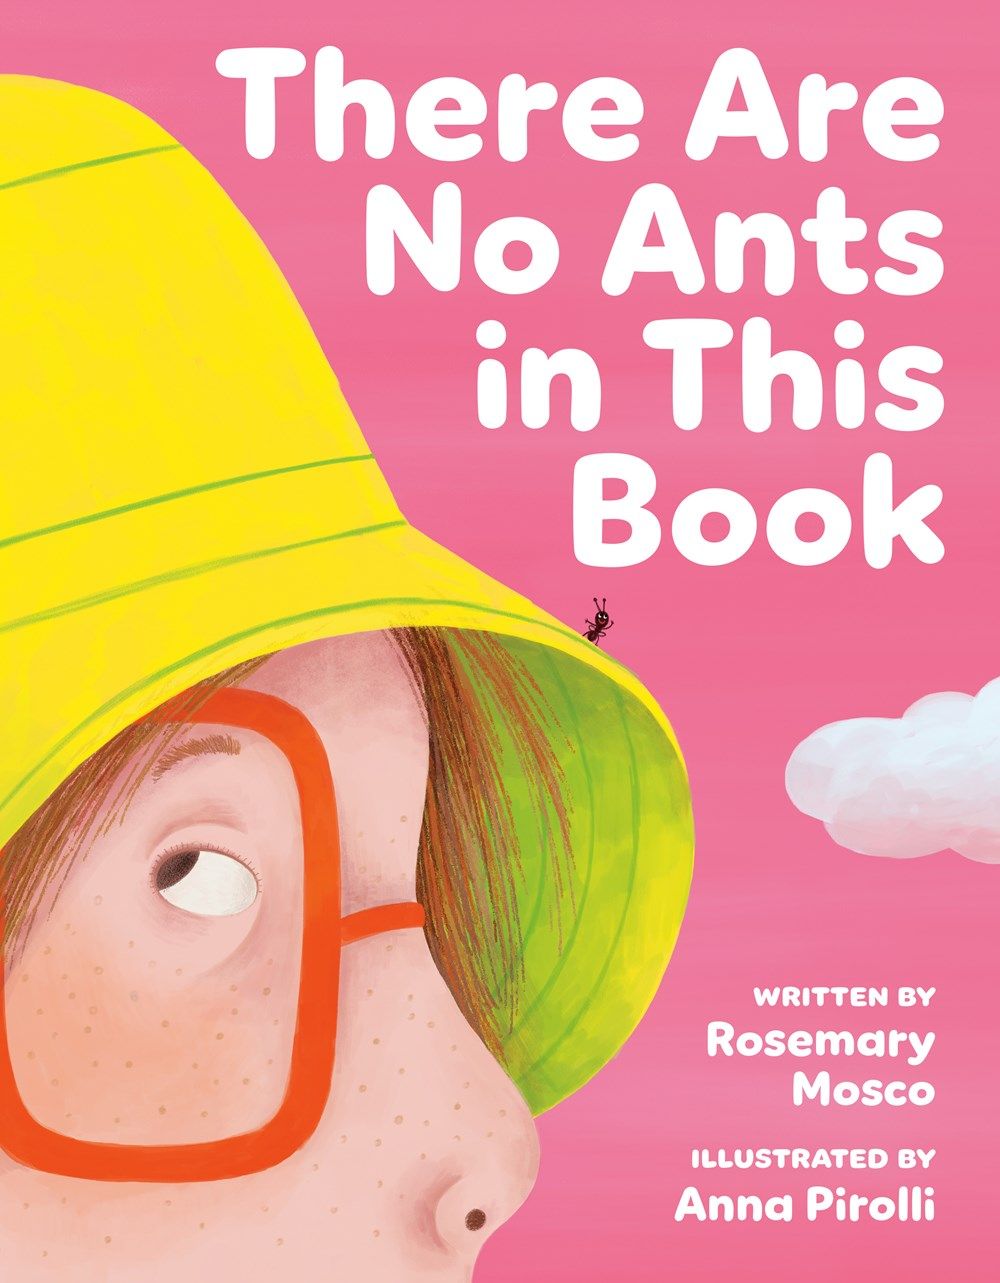 Cover of There Are No Ants in This Book by Rosemary Mosco, illustrated by Anna Pirolli